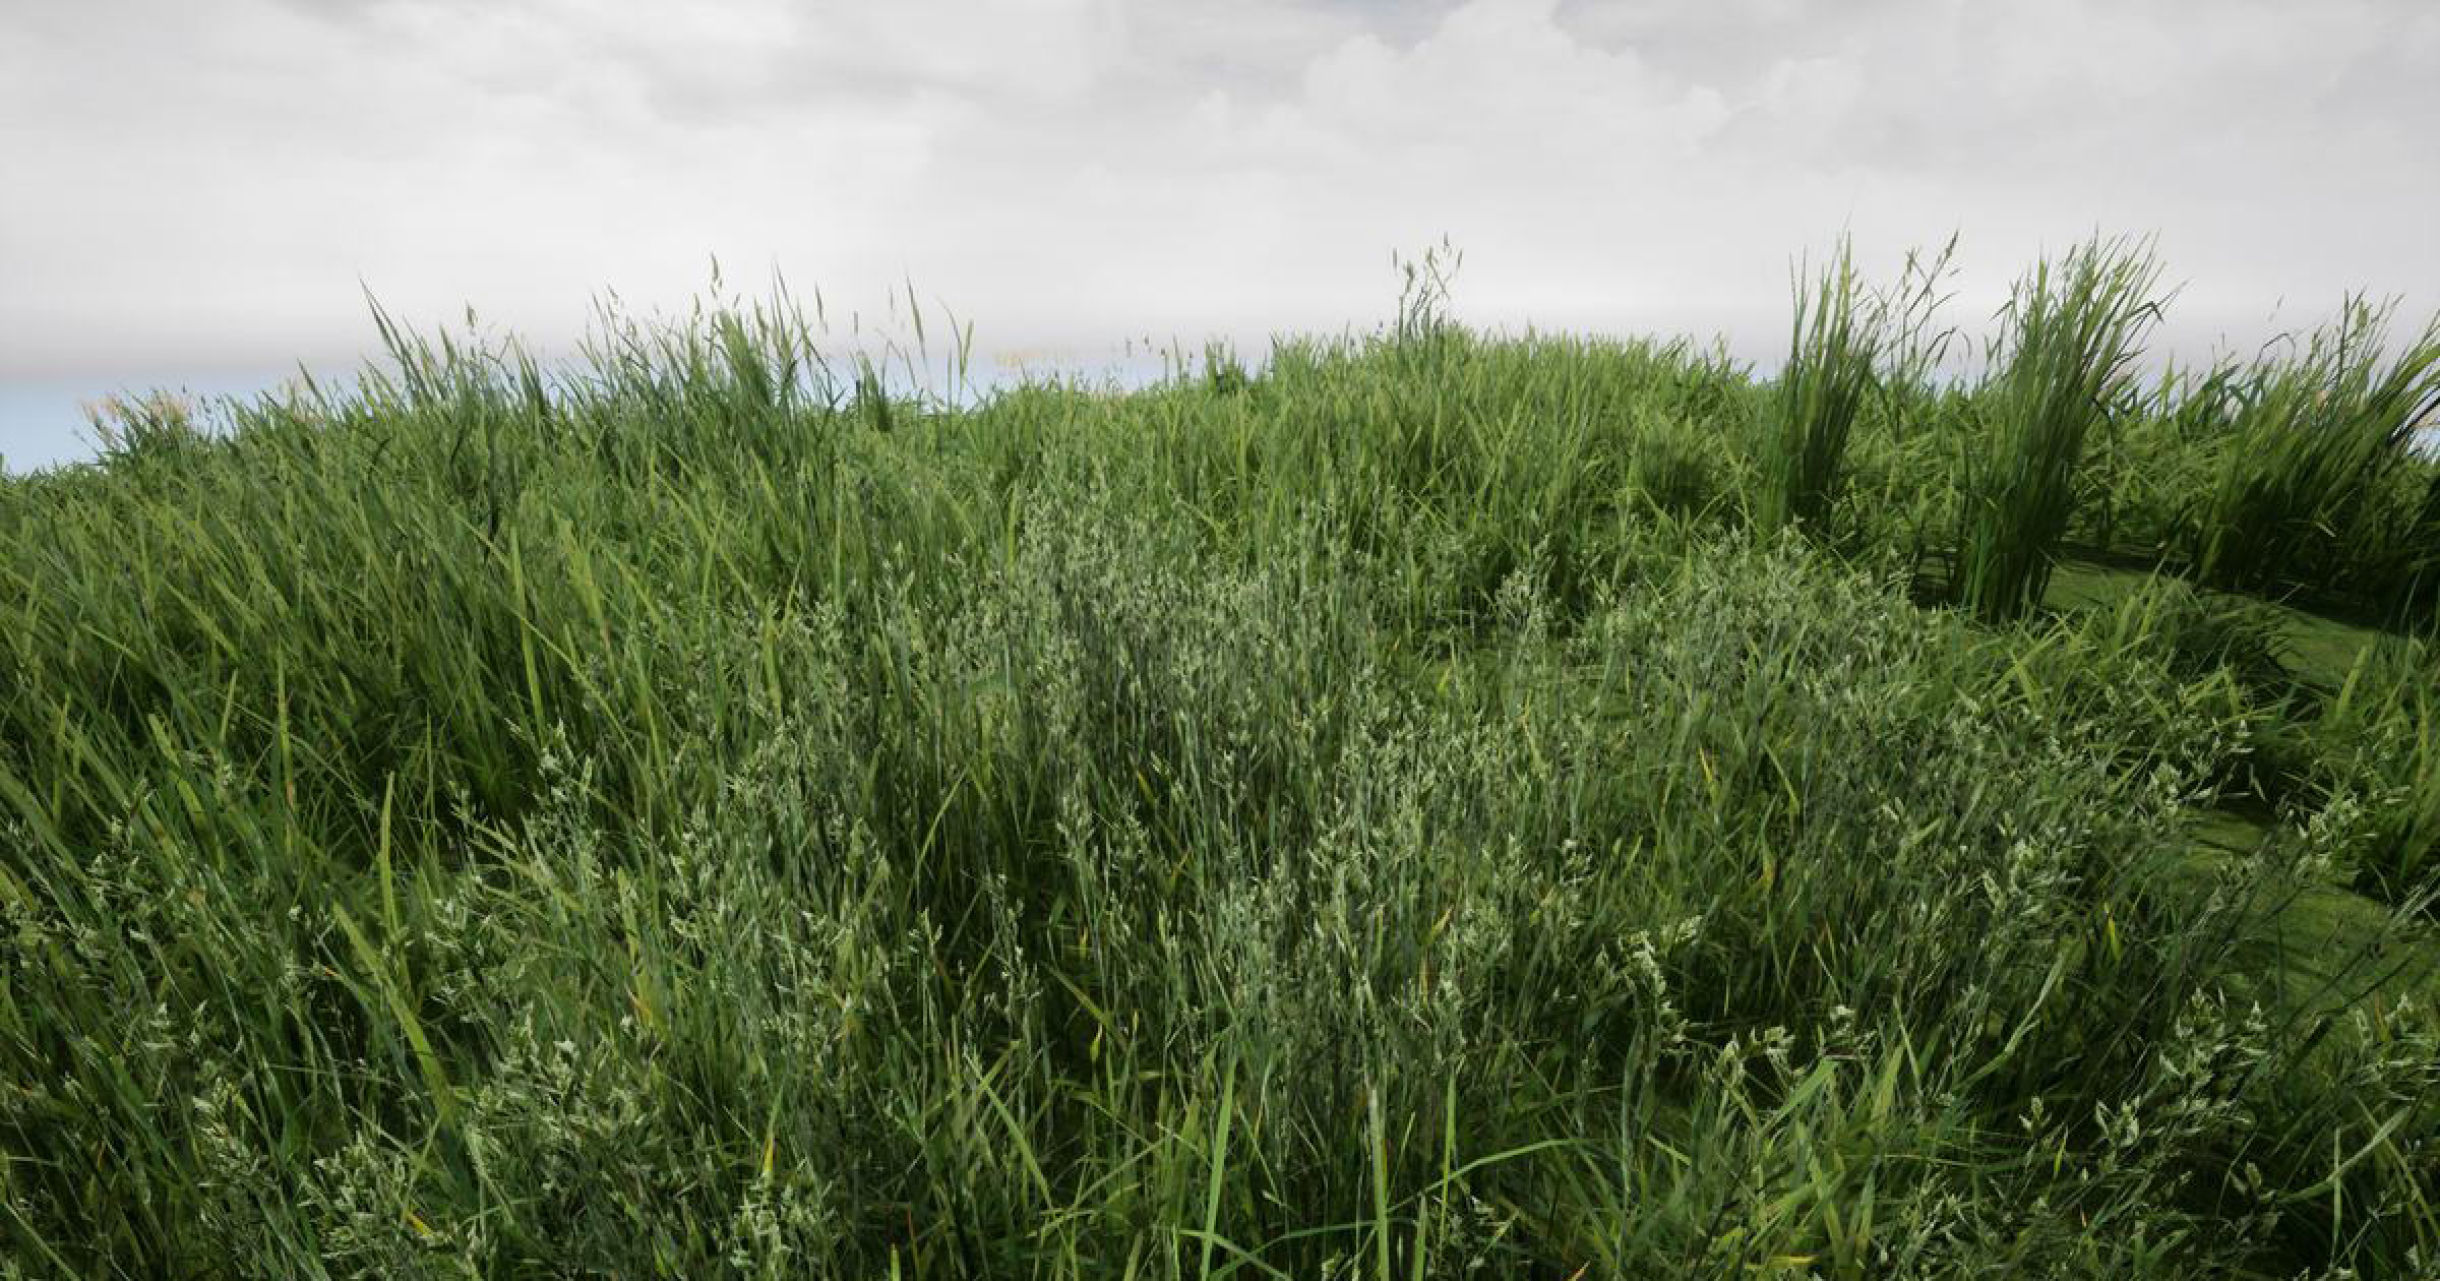 Step-by-Step: Modeling Nature with Static Grass